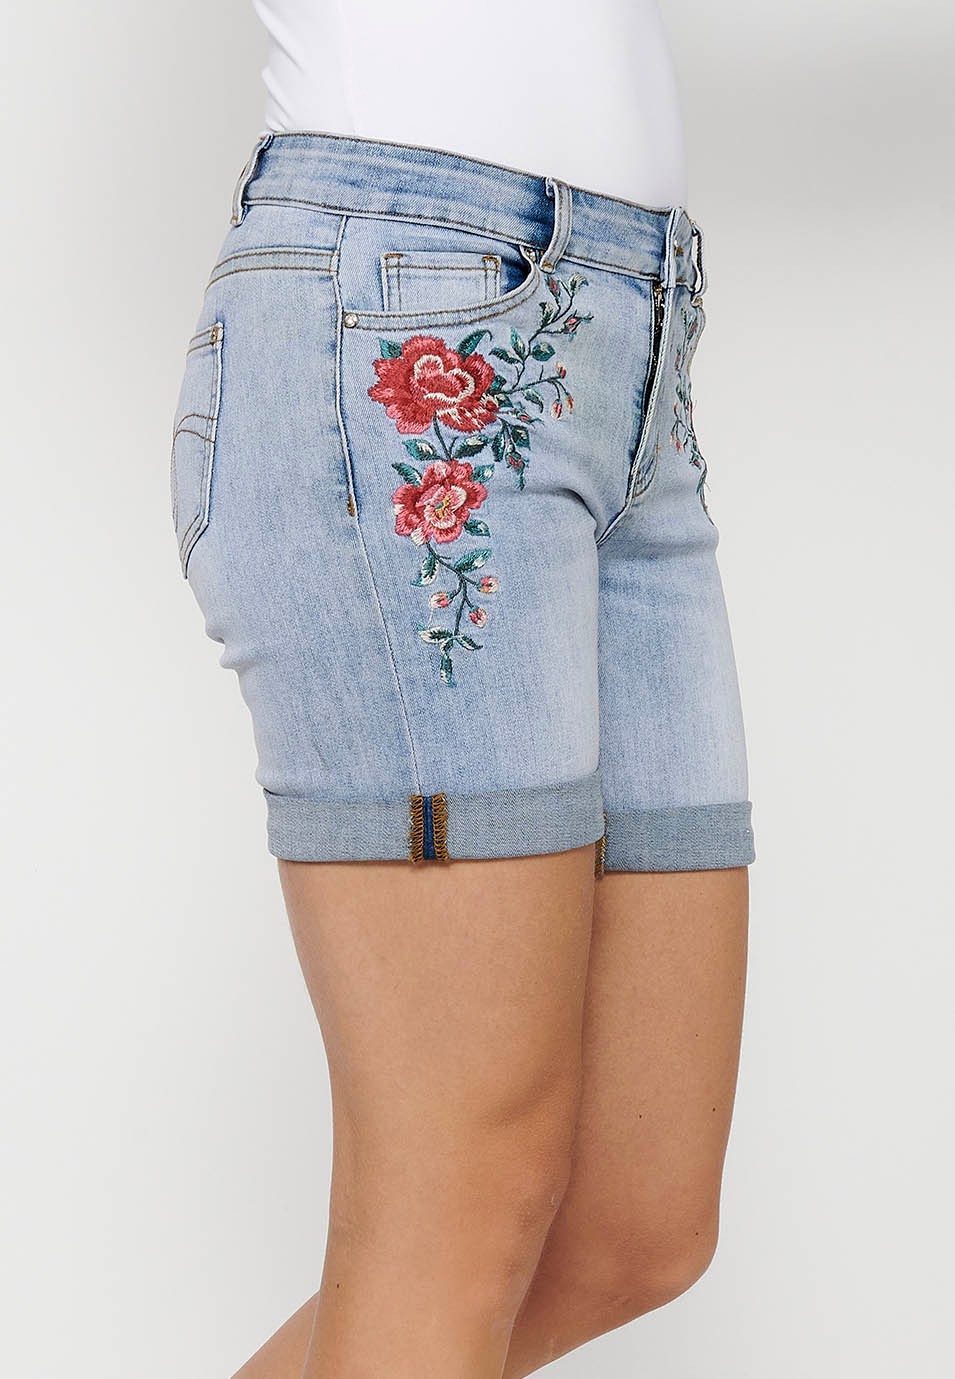 Denim shorts with front zipper and button closure and front floral embroidered details with five pockets, one blue pocket pocket for women 3